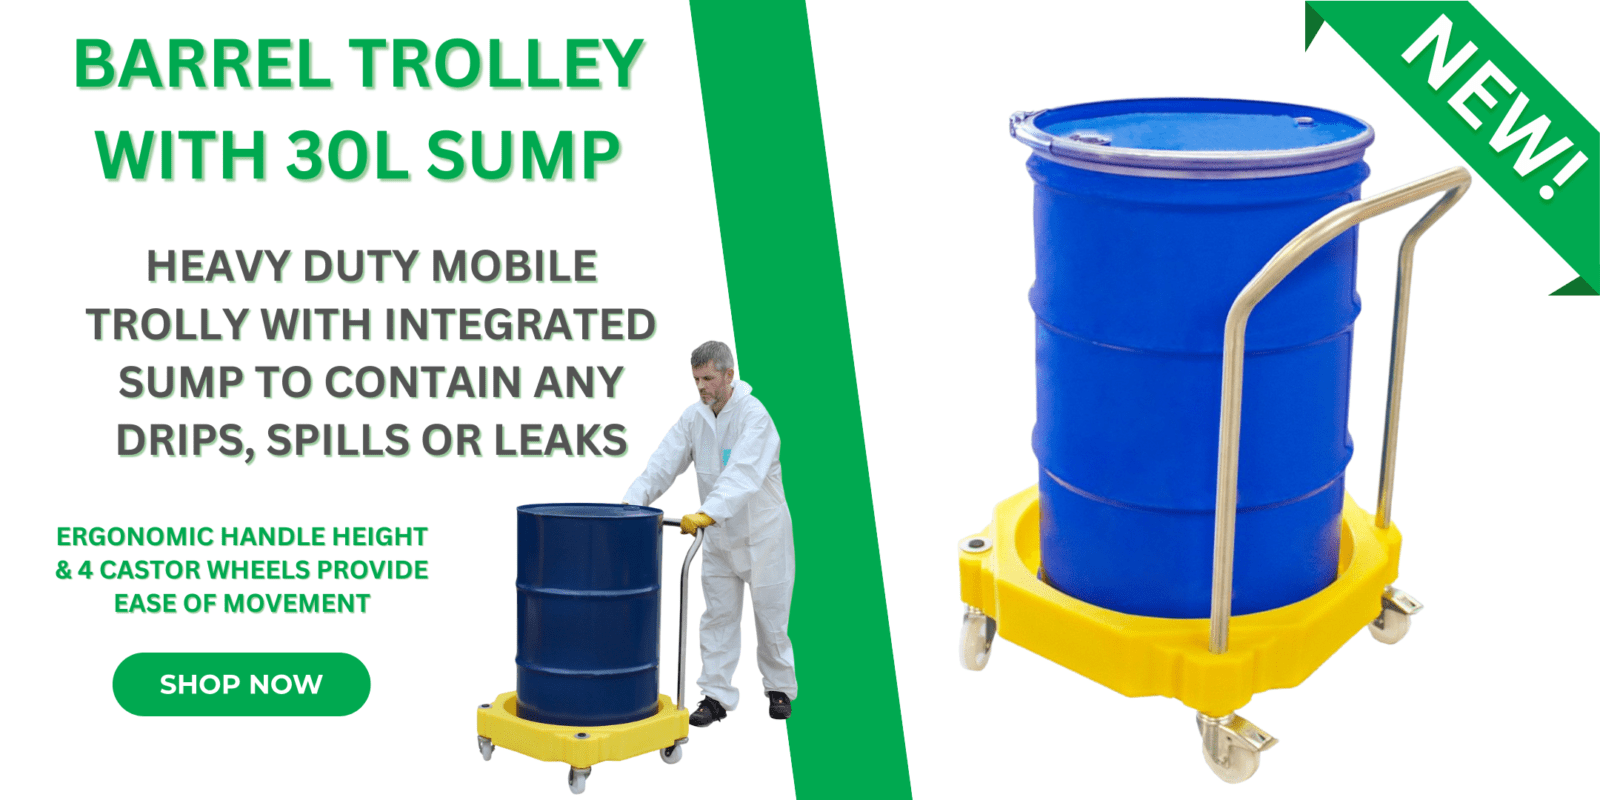 Barrel Trolley with 30 Litre sump